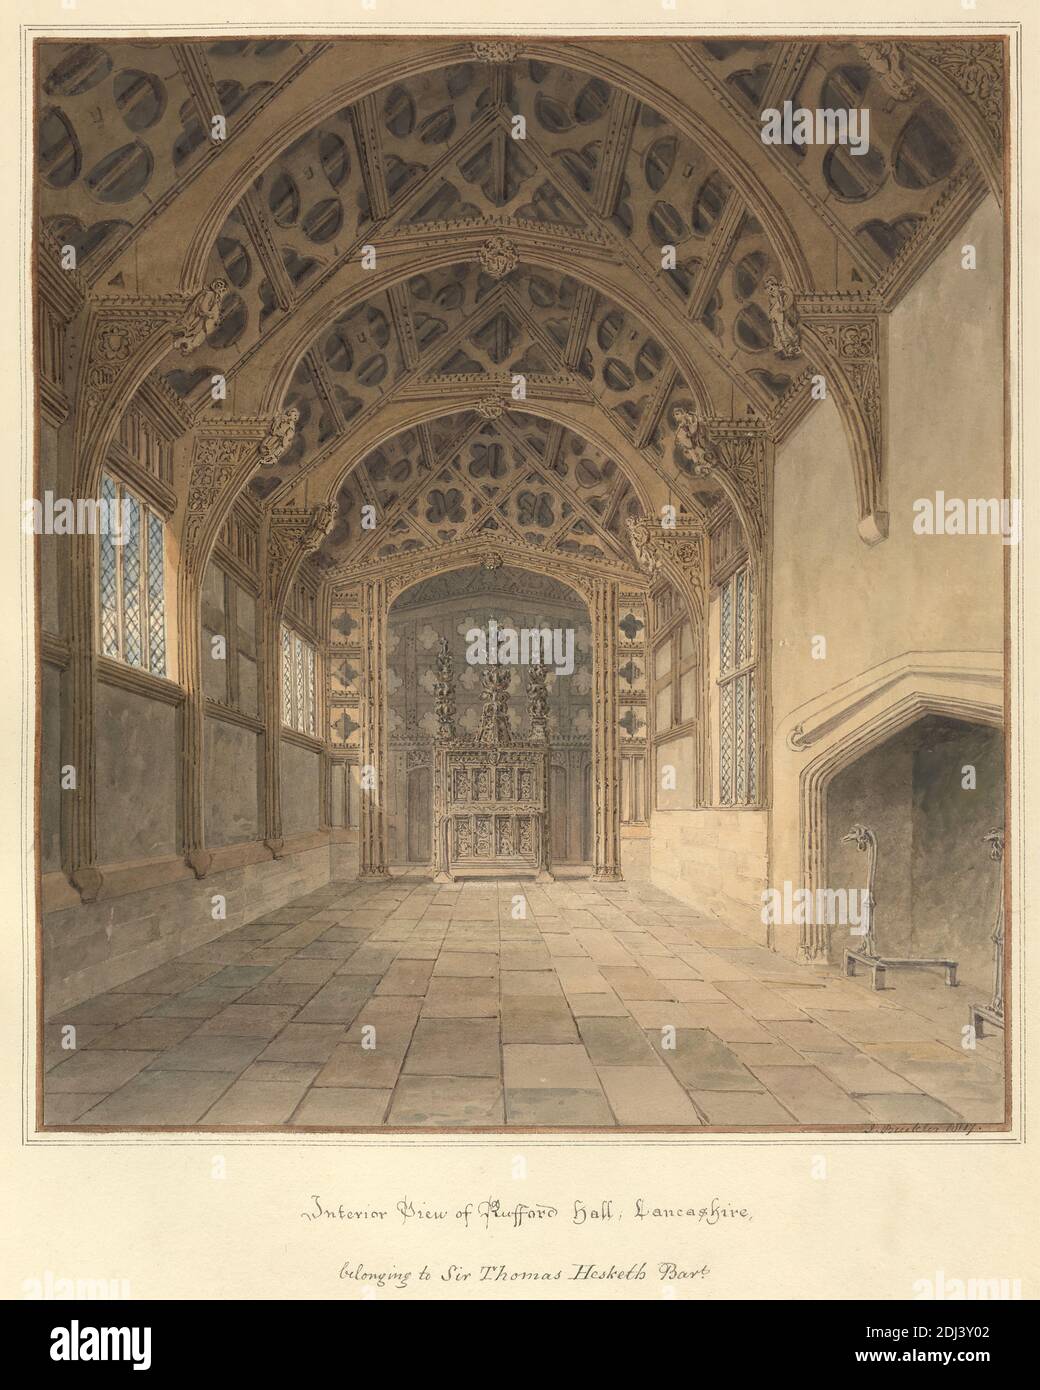 Interior View of Rufford Hall, Lancashire, belonging to Sir Thomas Hesketh Bart., John Buckler FSA, 1770–1851, British, and John Chessell Buckler, 1793–1894, British, 1817, Watercolor and pen and black ink on moderately thick, cream wove paper, Sheet: 19 3/4 × 14 inches (50.2 × 35.6 cm) and Image: 11 7/8 × 10 1/2 inches (30.2 × 26.7 cm), abbey, arches, architectural subject, corbels, country house, engravings, fireplace, open timber roofs, transoms (windows), windows, England, Europe, Lancashire, Rufford Old Hall, United Kingdom Stock Photo